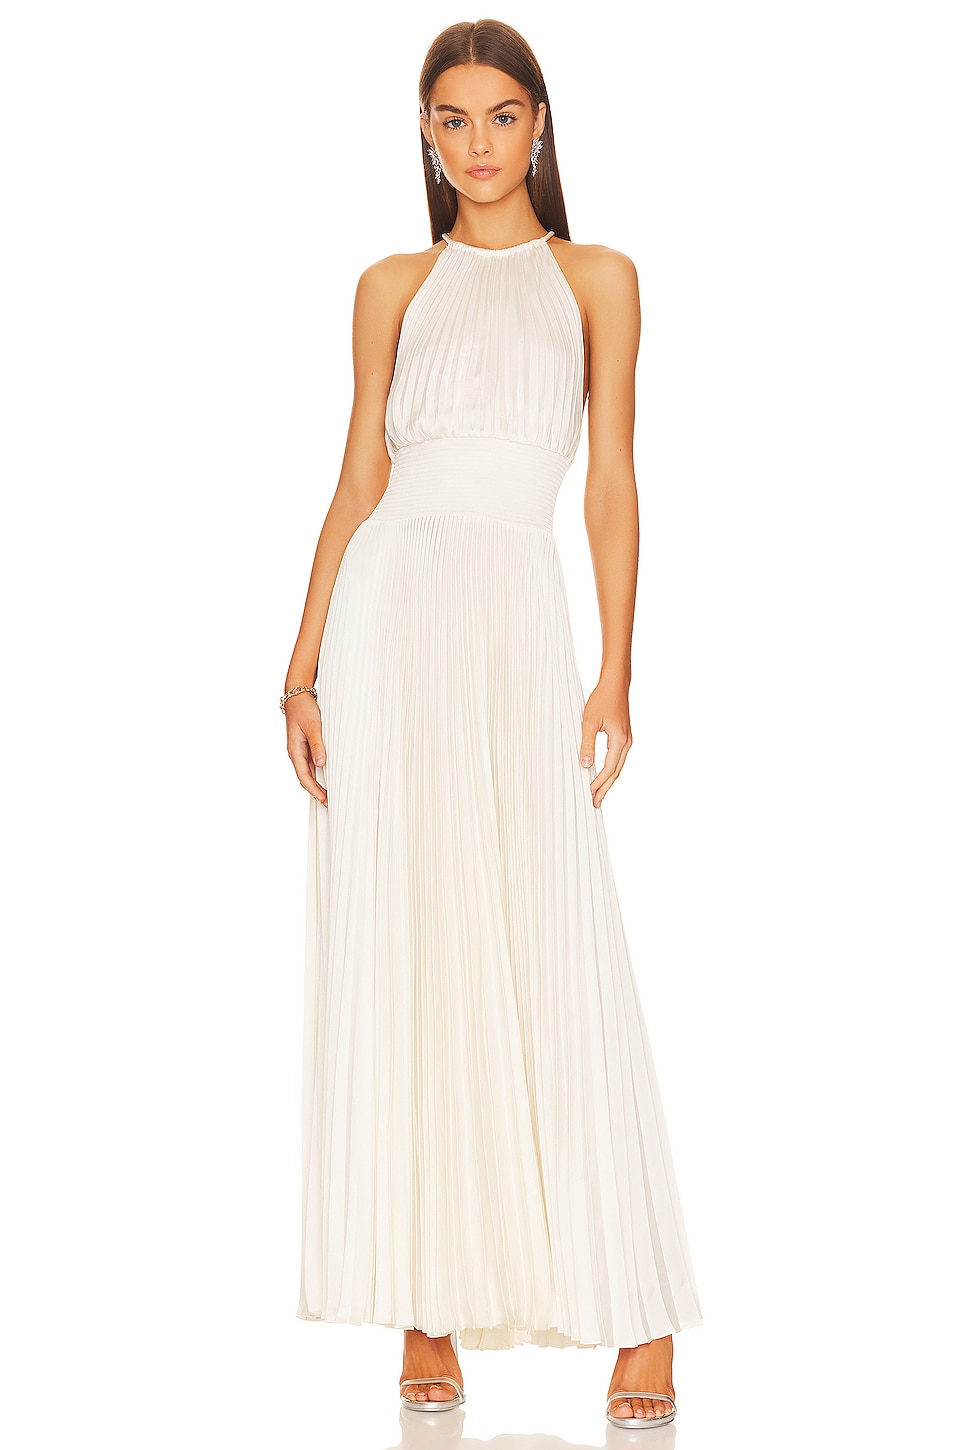 Discover your favorite stunning white maxi dress for summer vacation to make you feel like a Greek Goddess. Plus flat sandals & accessories.